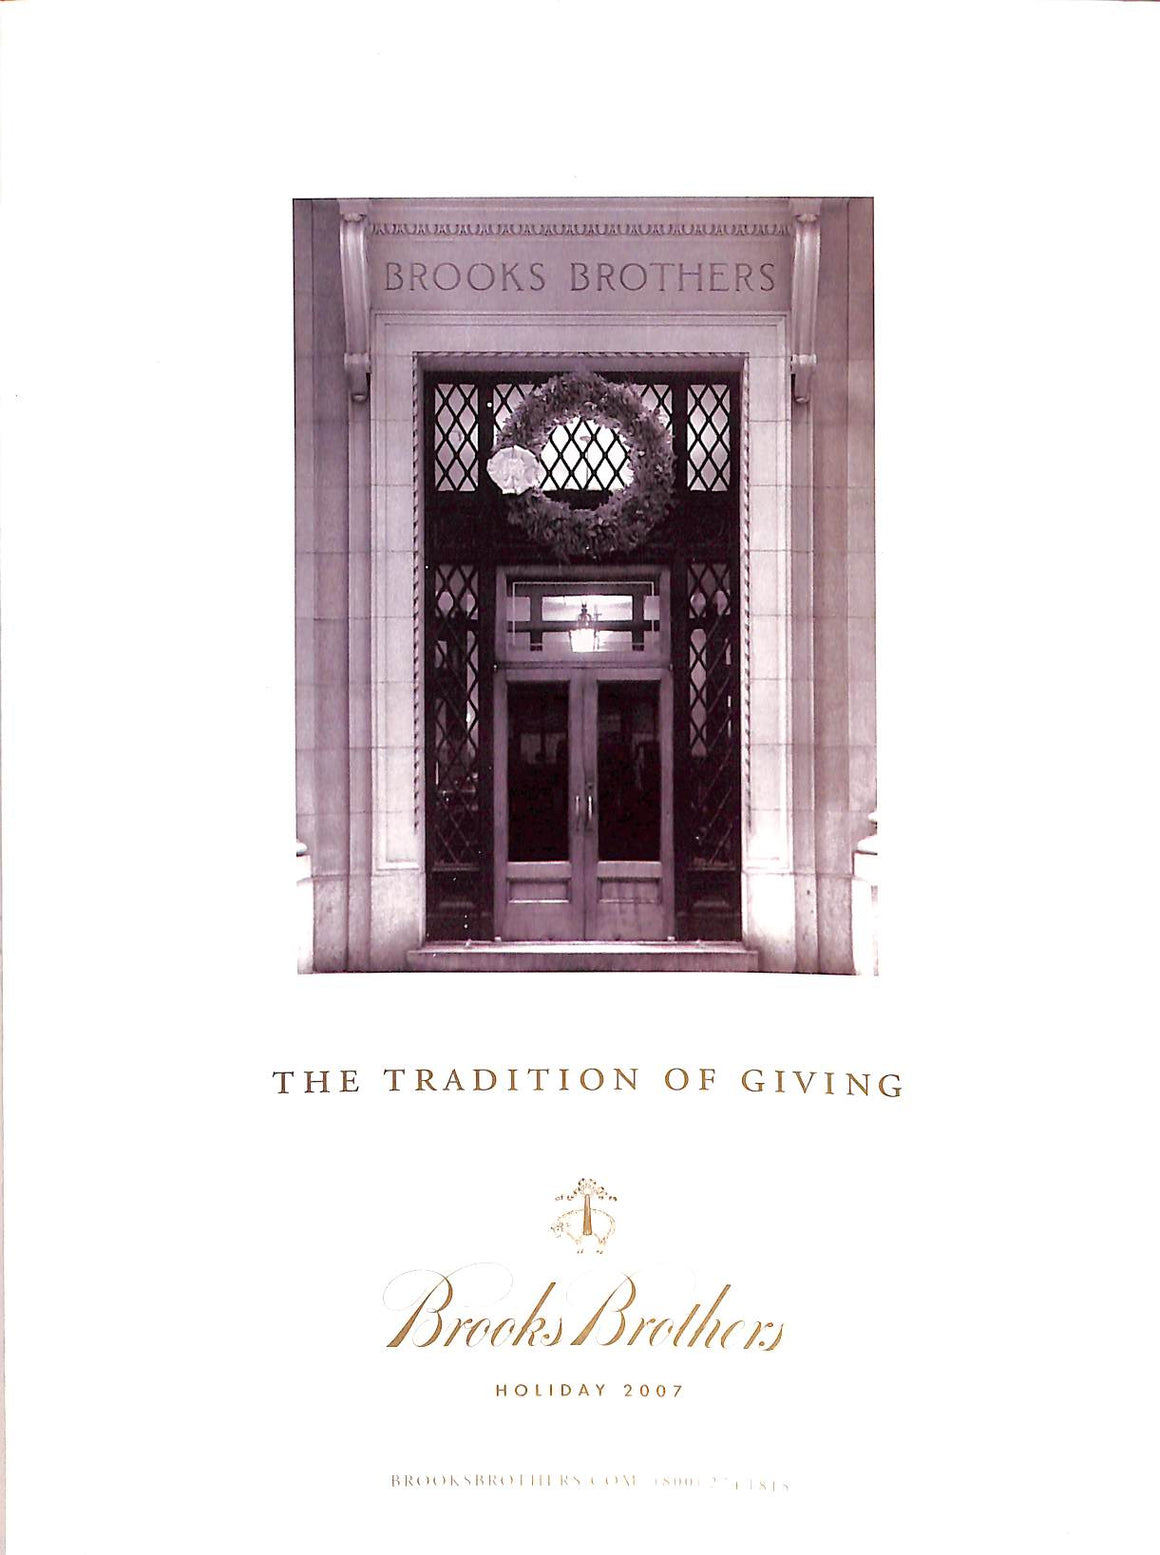 Brooks Brothers Holiday 2007 Catalog (SOLD)